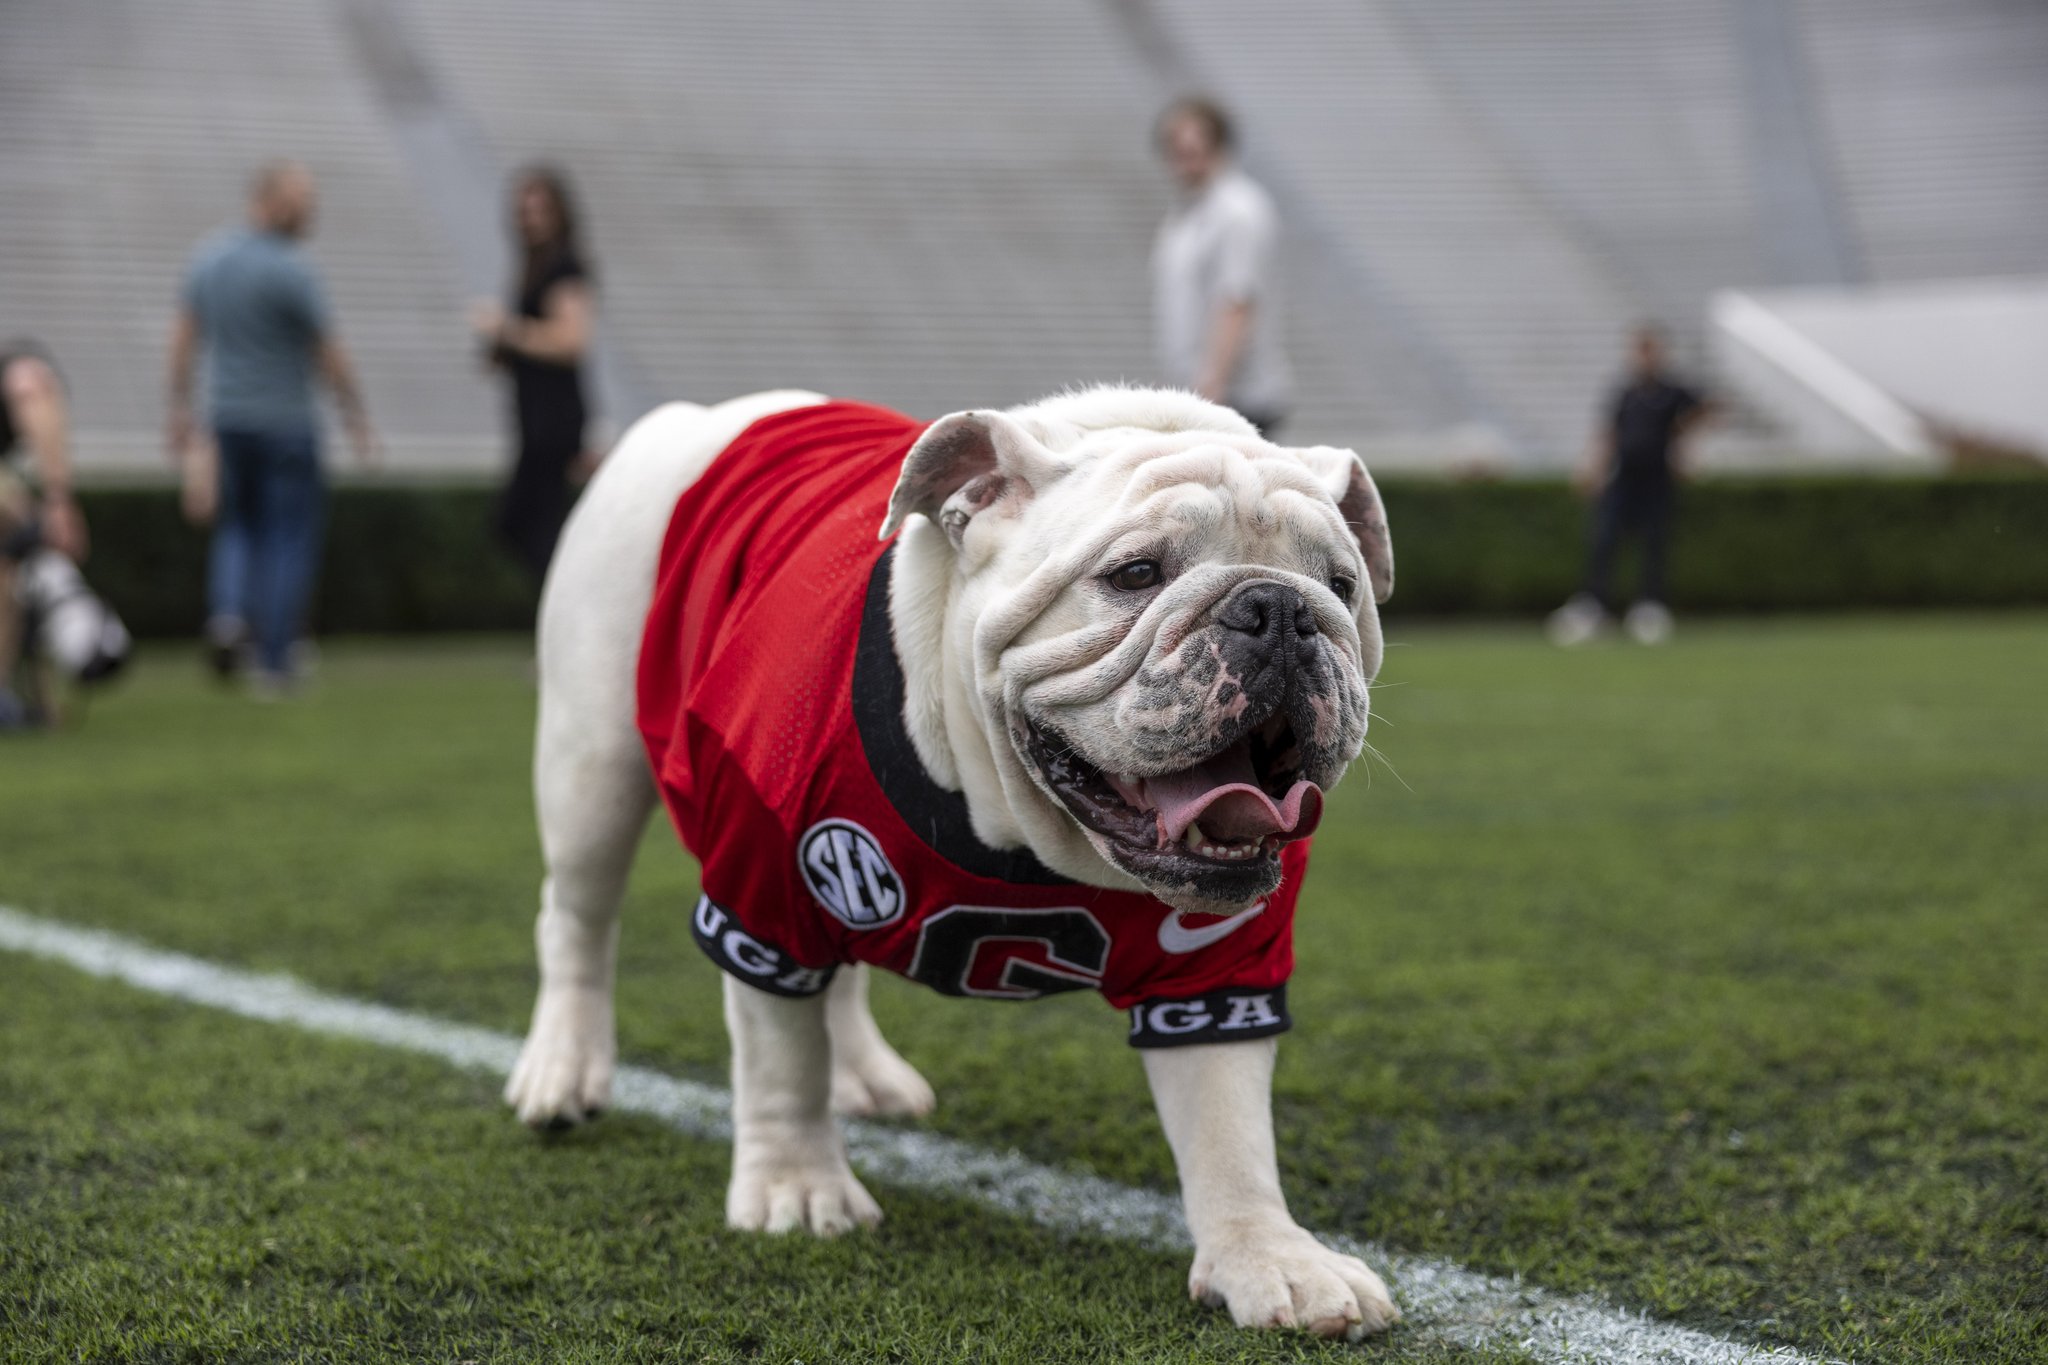 UGA on X: A new era begins. 👑 We are excited to welcome Boom to Sanford  Stadium on Saturday as he officially puts on the collar and becomes Uga XI  at G-Day! #